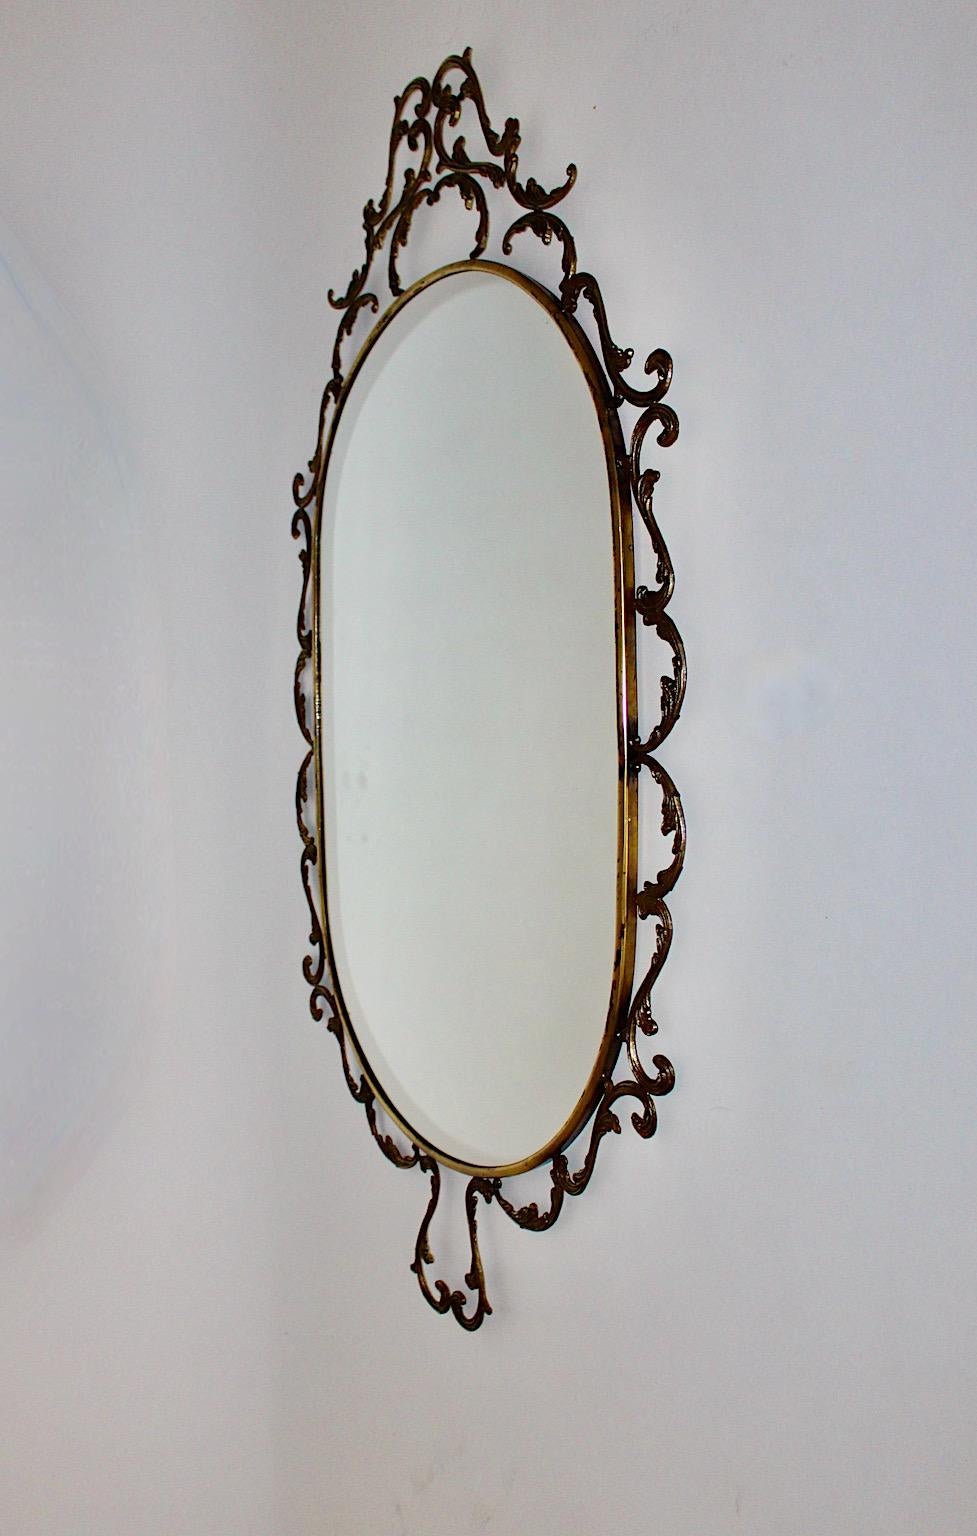 Mid-20th Century Baroque Revival Style Vintage Oval Wall Mirror Brass 1960s Italy For Sale